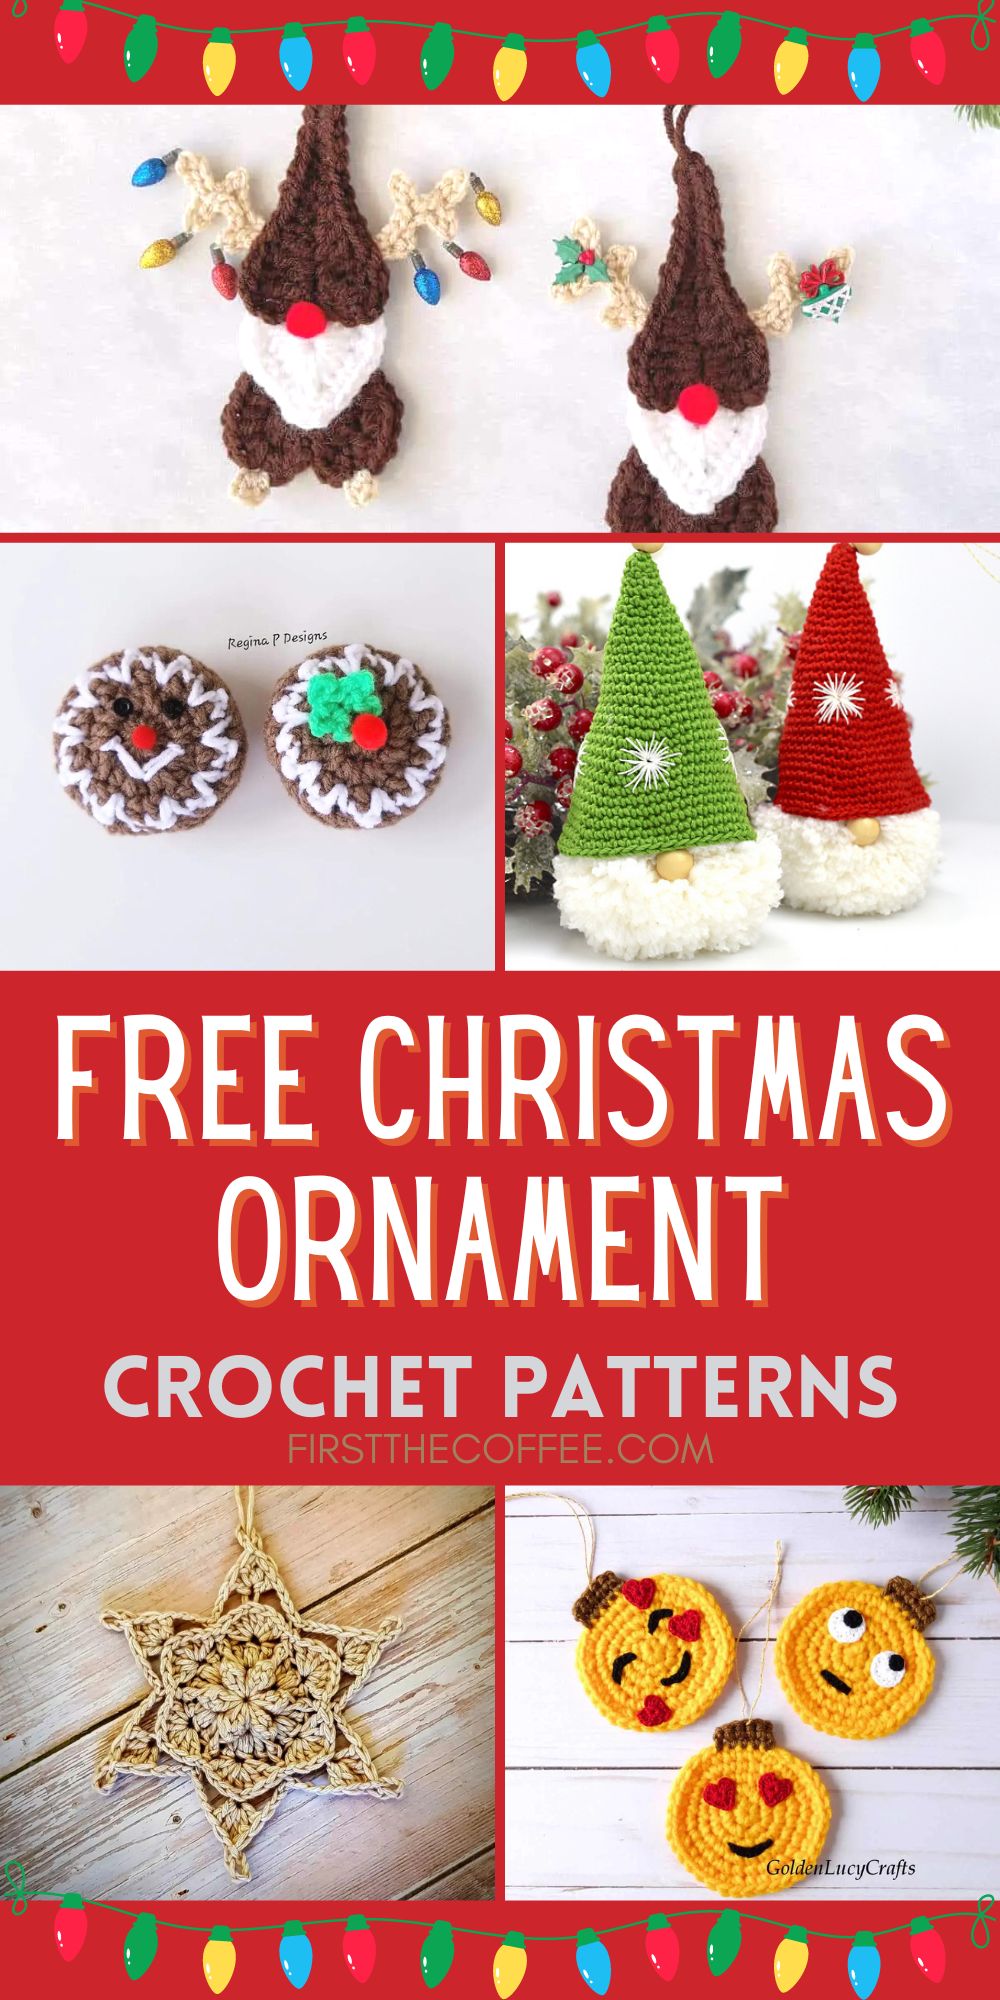 Free Crochet Christmas Ornament Patterns for the Holidays